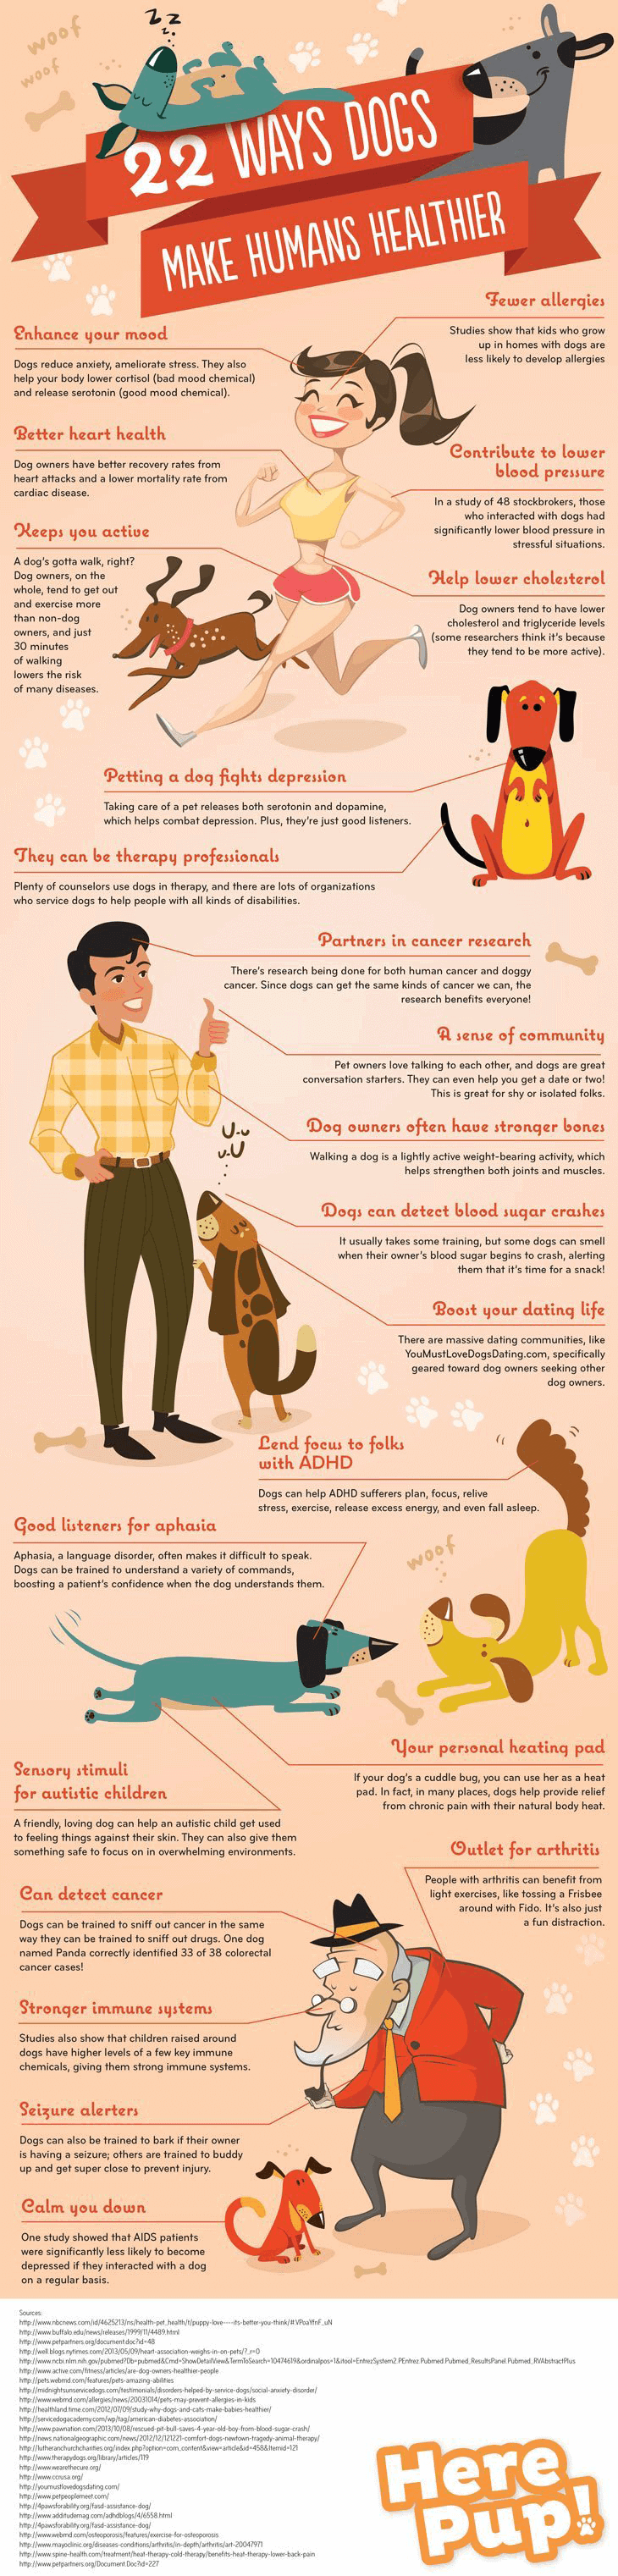 22 ways dogs make humans healthier – Full graphic